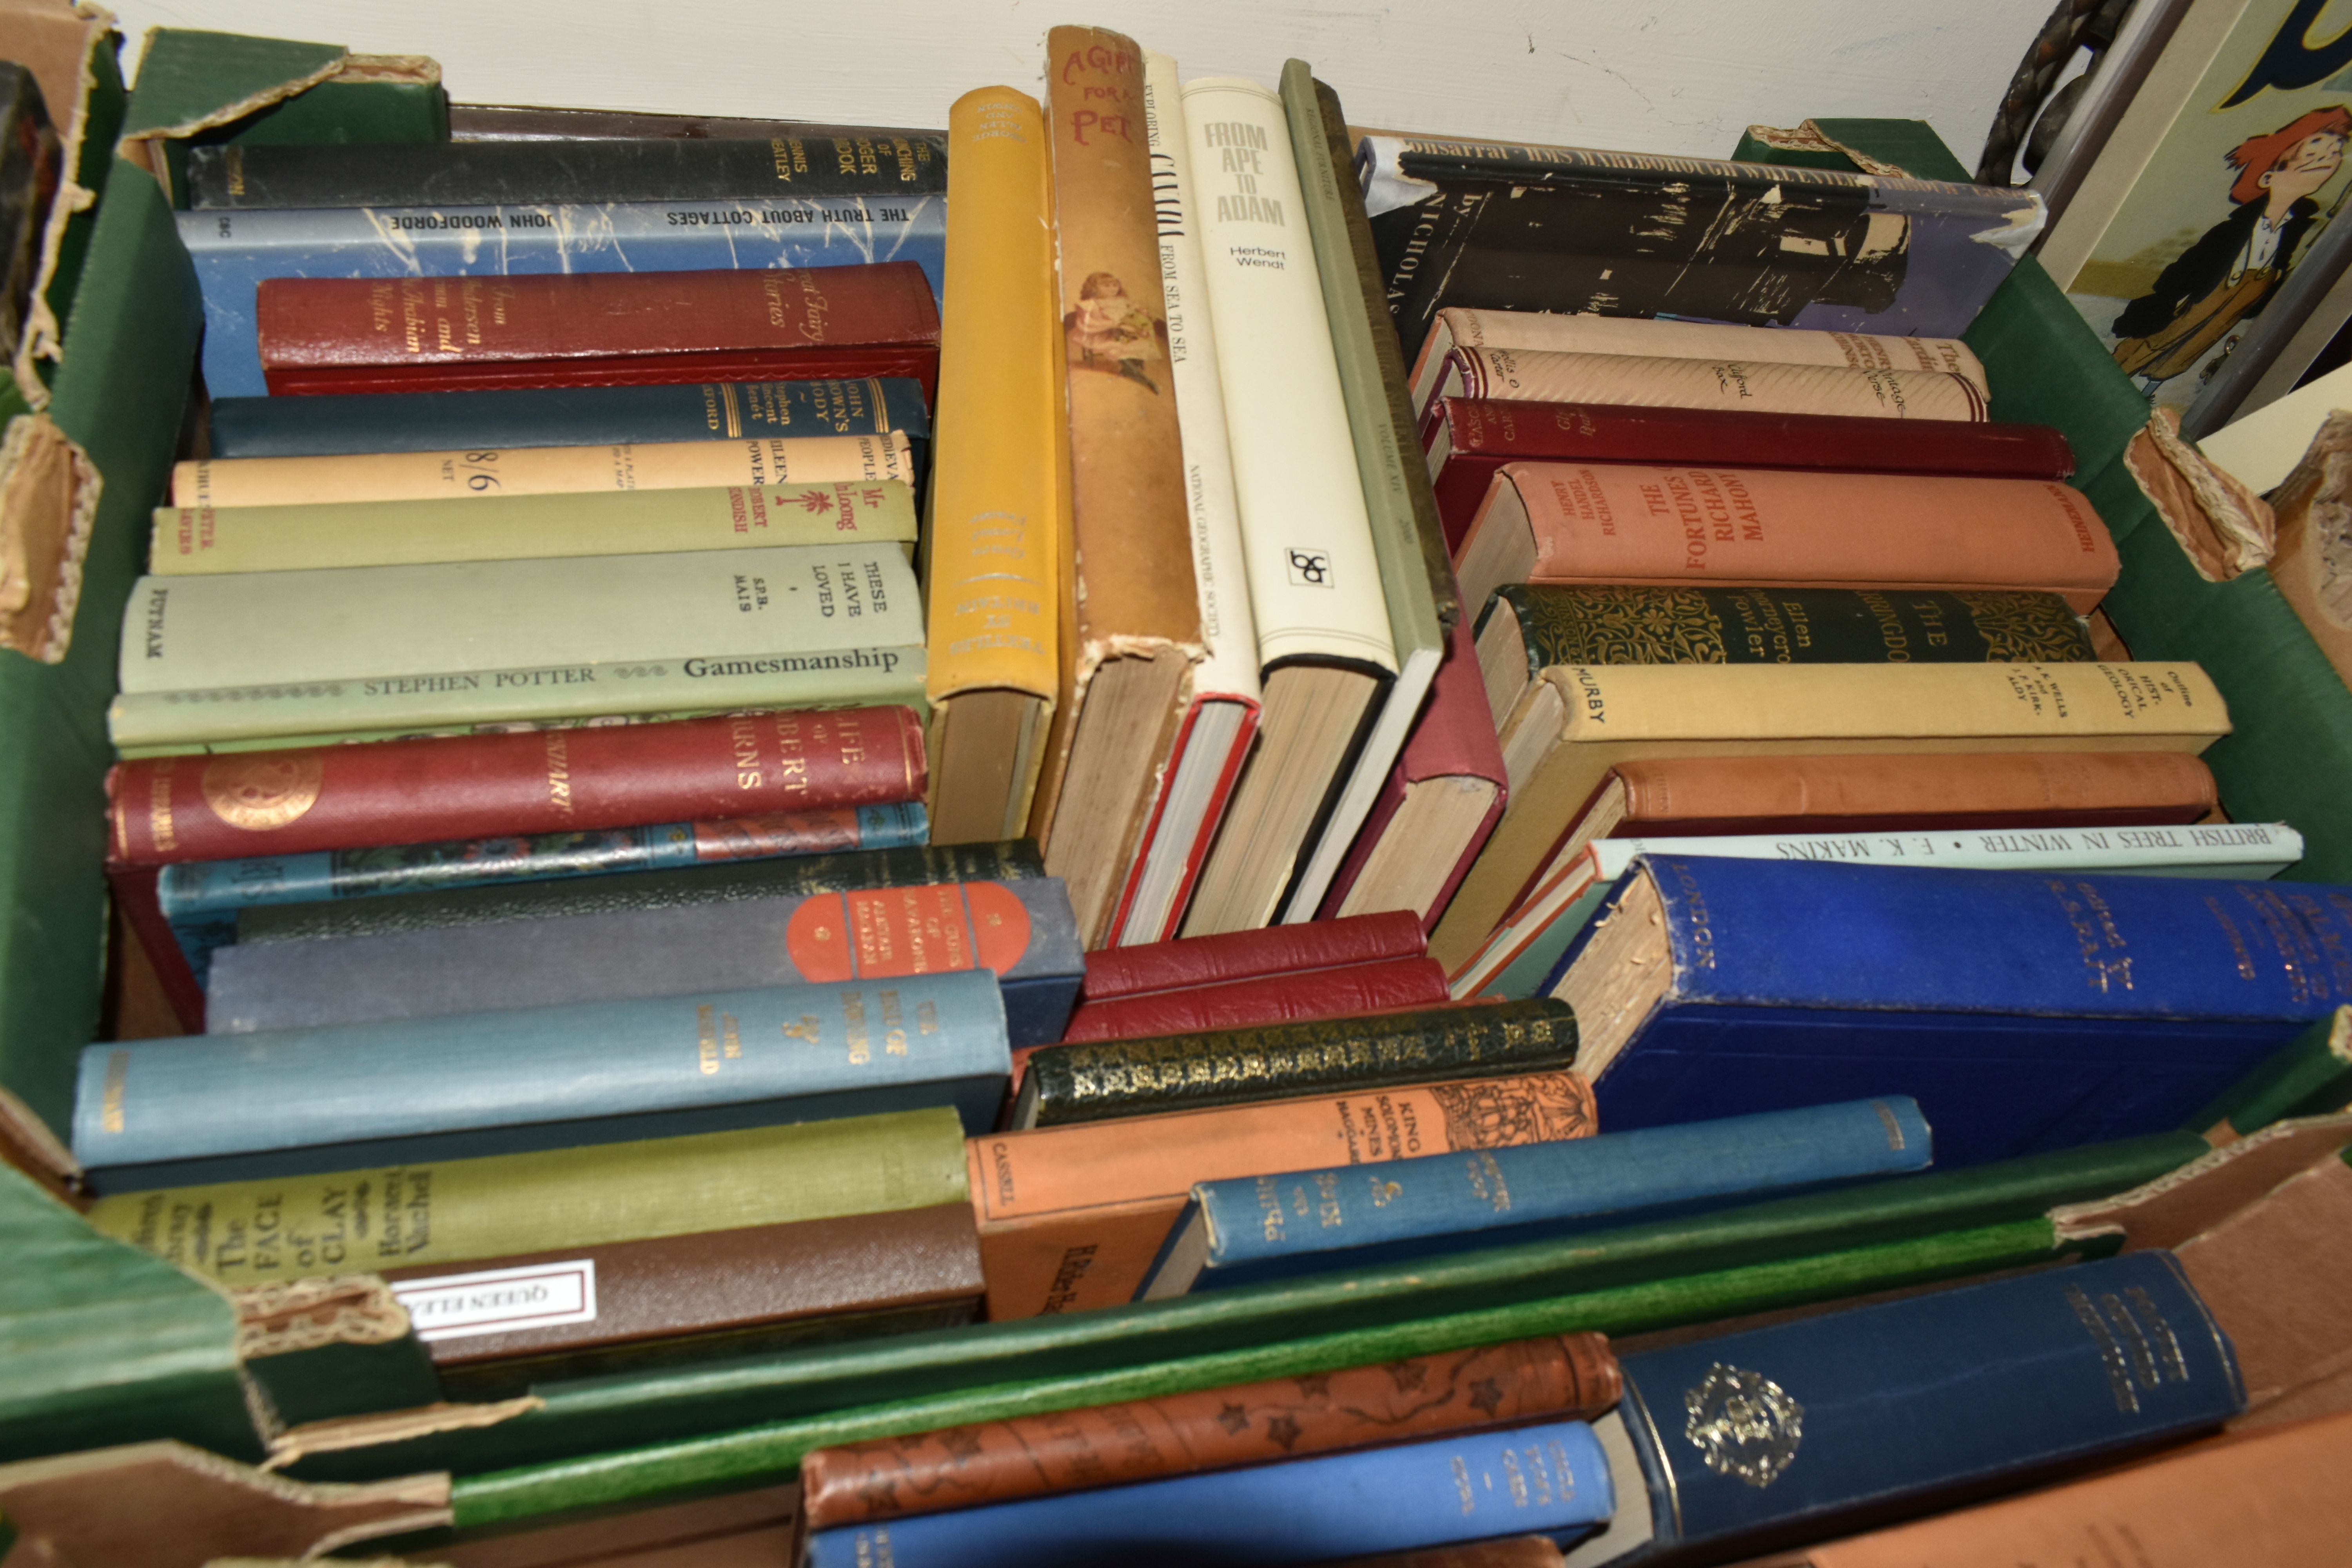 FOUR BOXES OF ANTIQUARIAN BOOKS, approximately eighty hardback books, titles include British Steam - Image 5 of 5